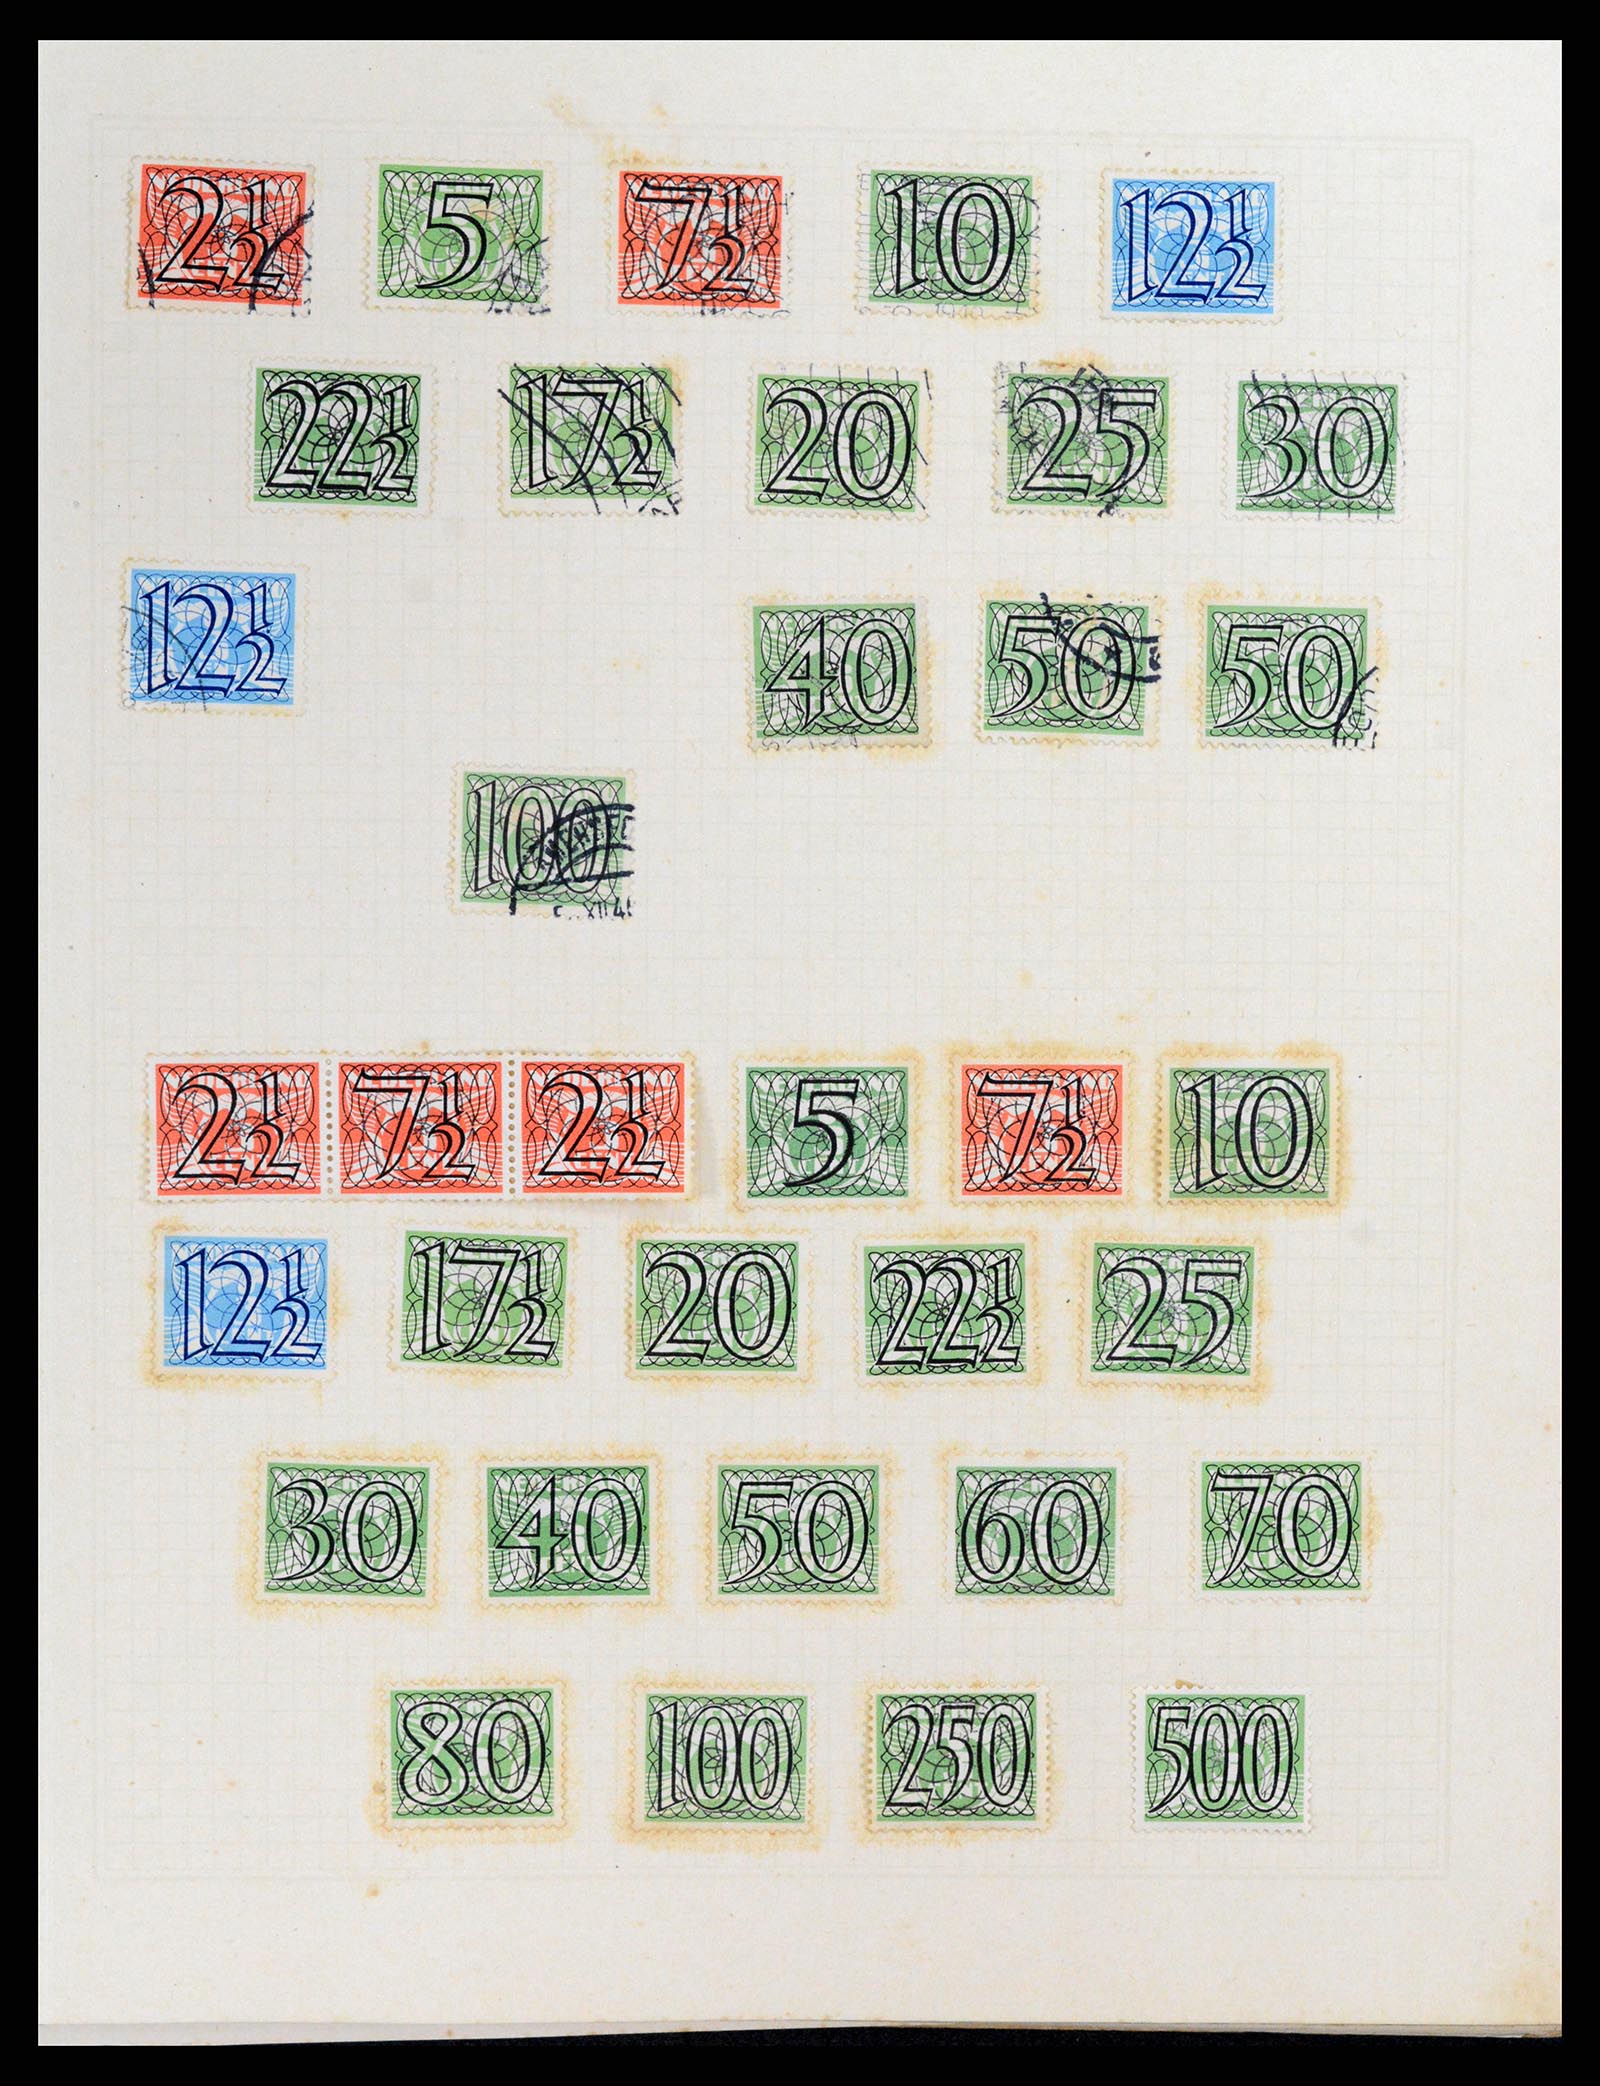 37868 011 - Stamp Collection 37868 Netherlands and territories 1864-1950.